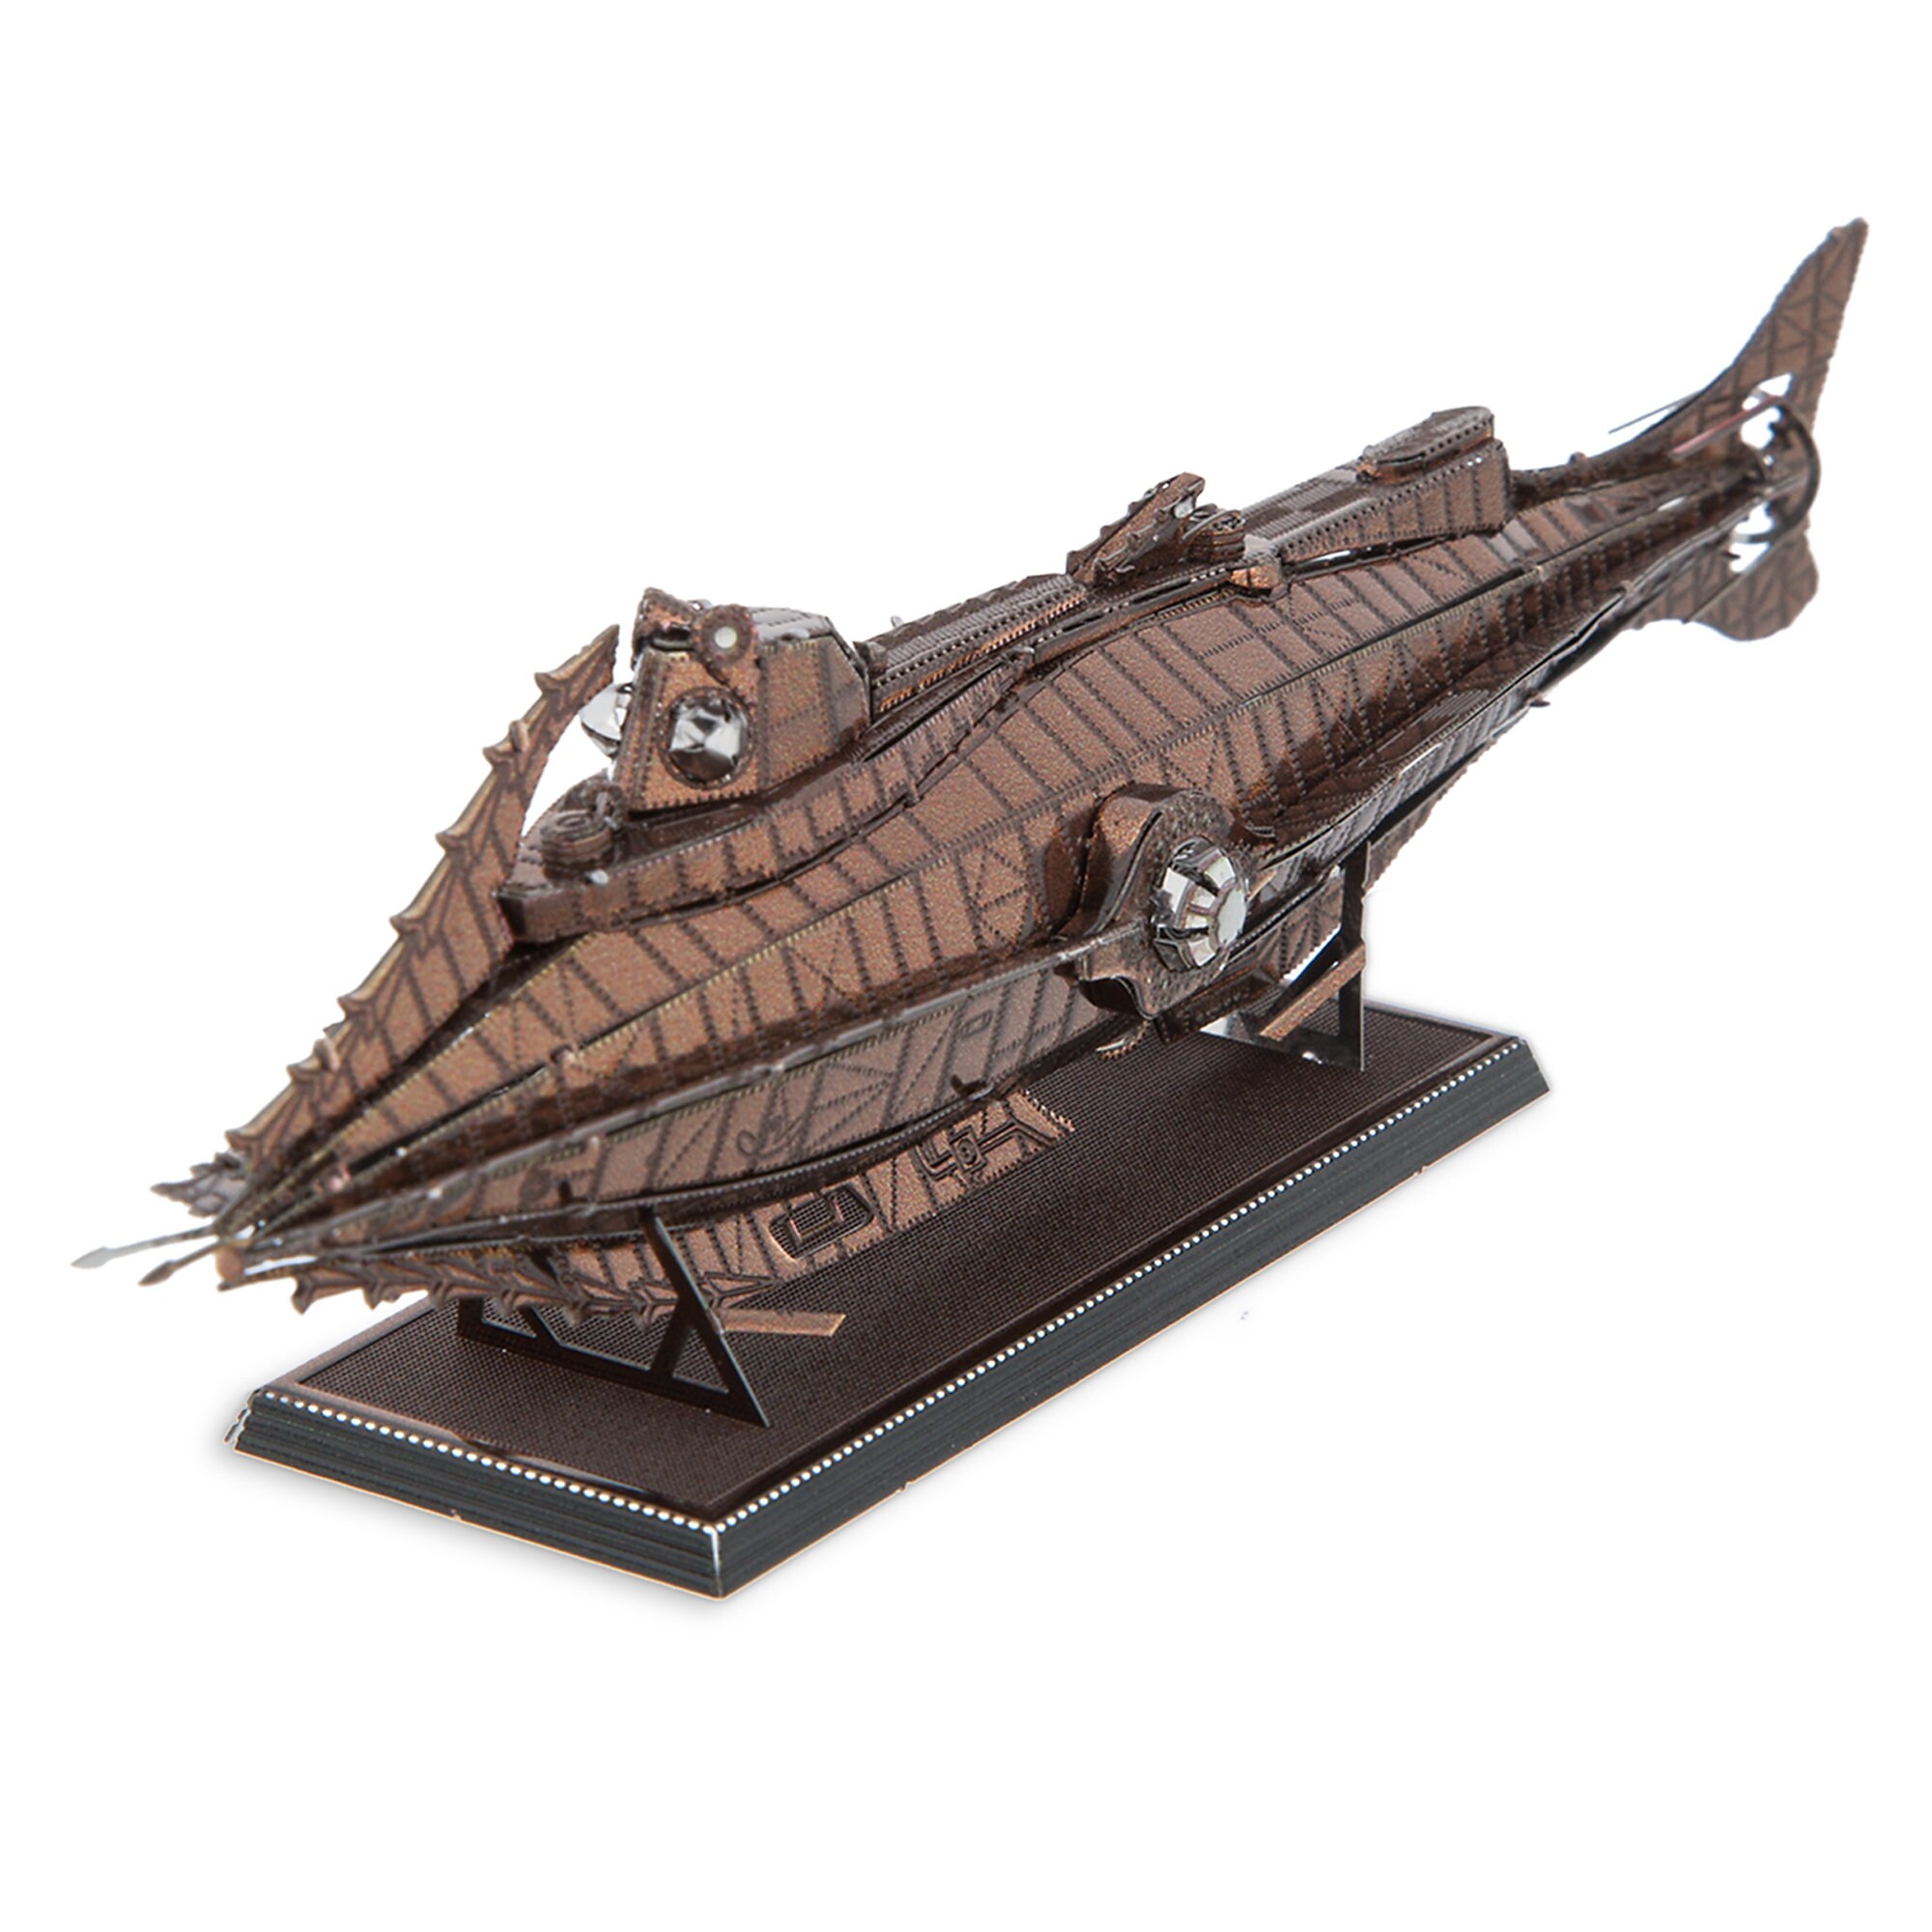 nautilus-submarine-metal-earth-3d-model-kit-is-now-available-dis